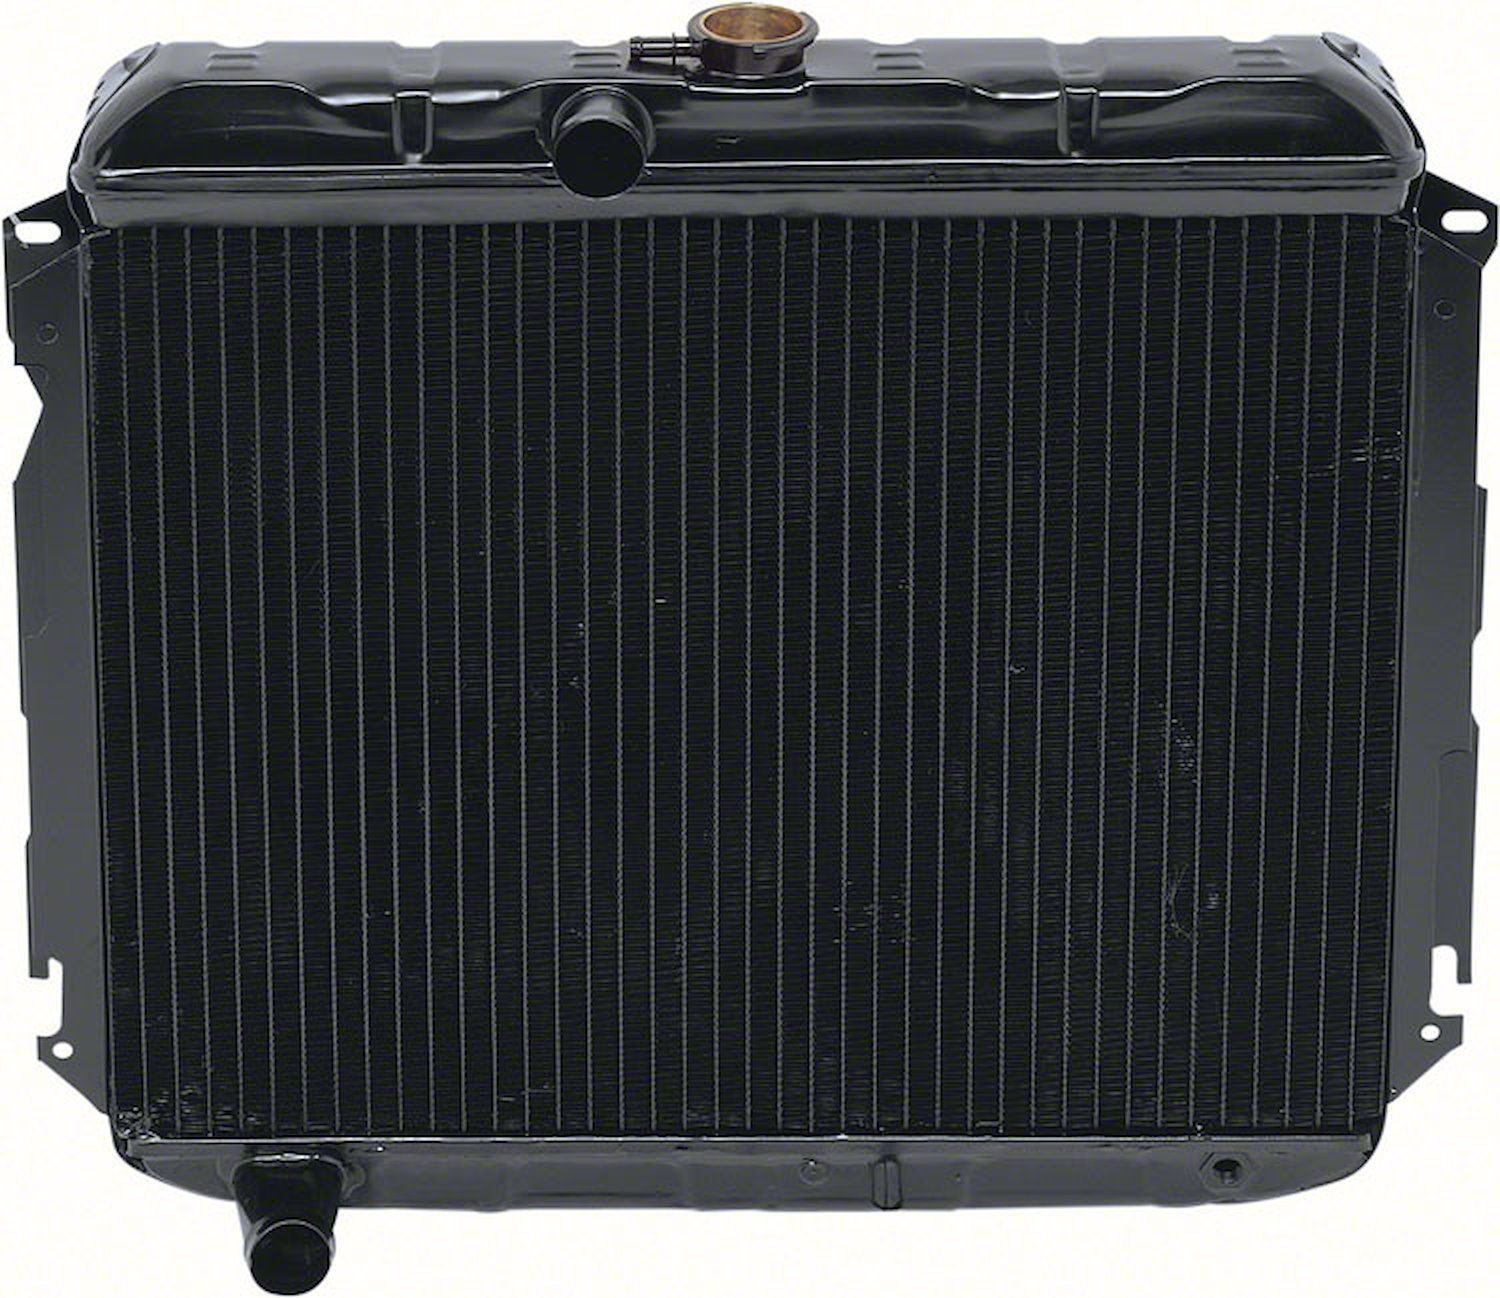 MB2380S Replacement Radiator 1966-69 Mopar B-Body Small Block V8 With Standard Trans 4 Row